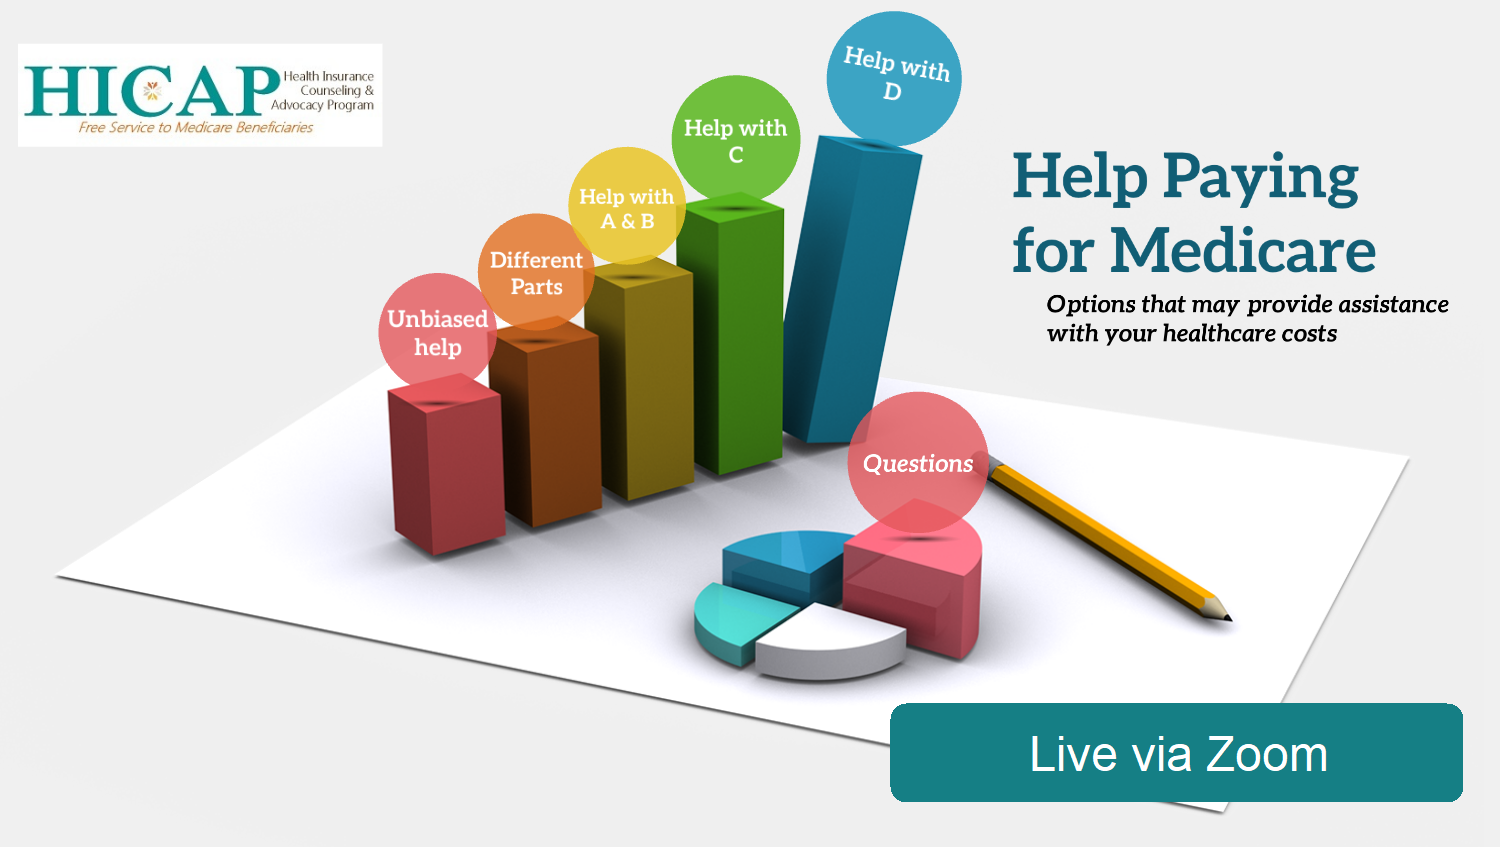 Help Paying for Medicare HICAP leaflet for ZOOM seminar with 3D bar and pie graph graphics.